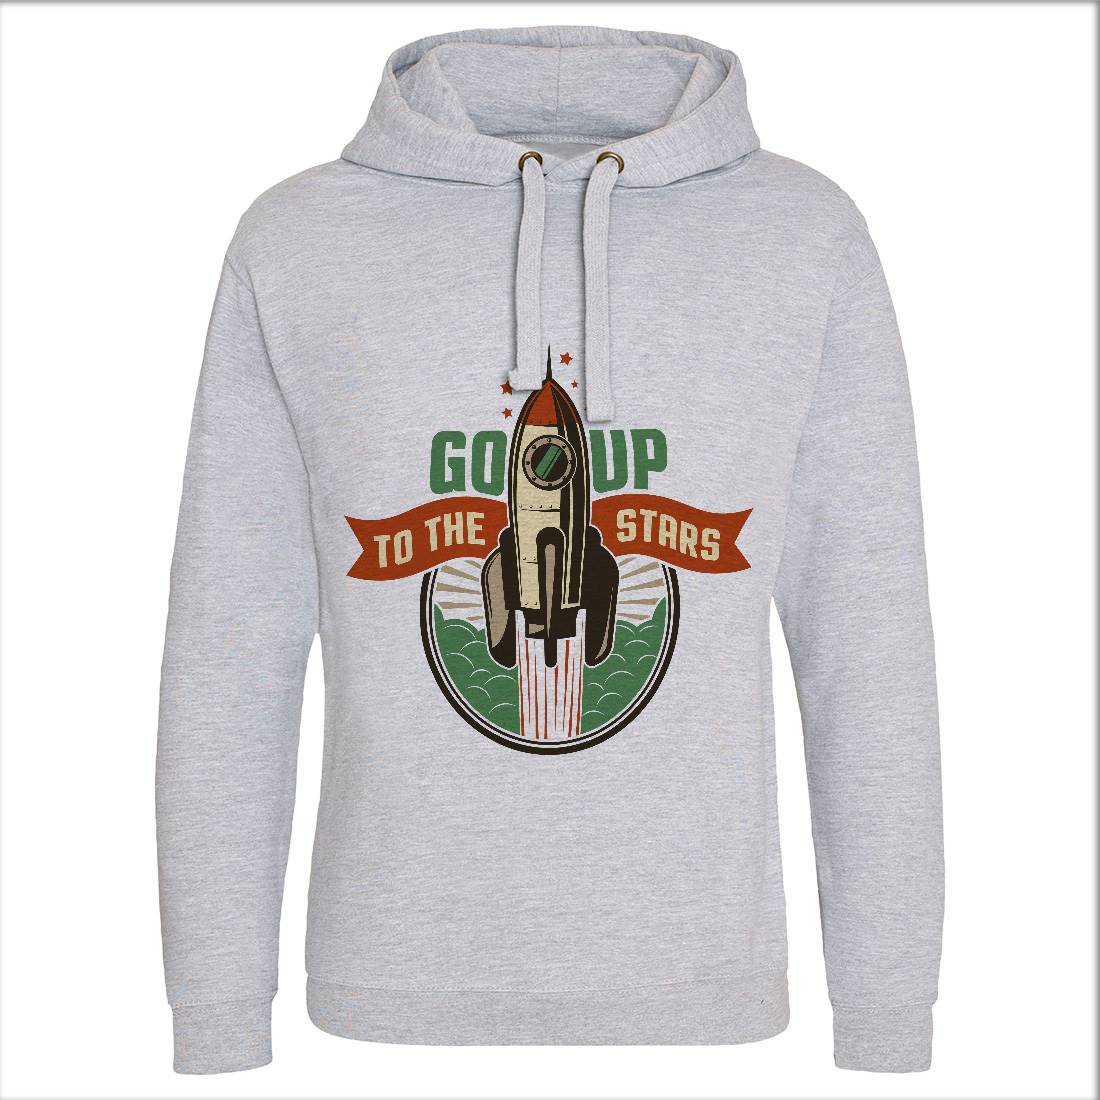 Go Up Mens Hoodie Without Pocket Space D896